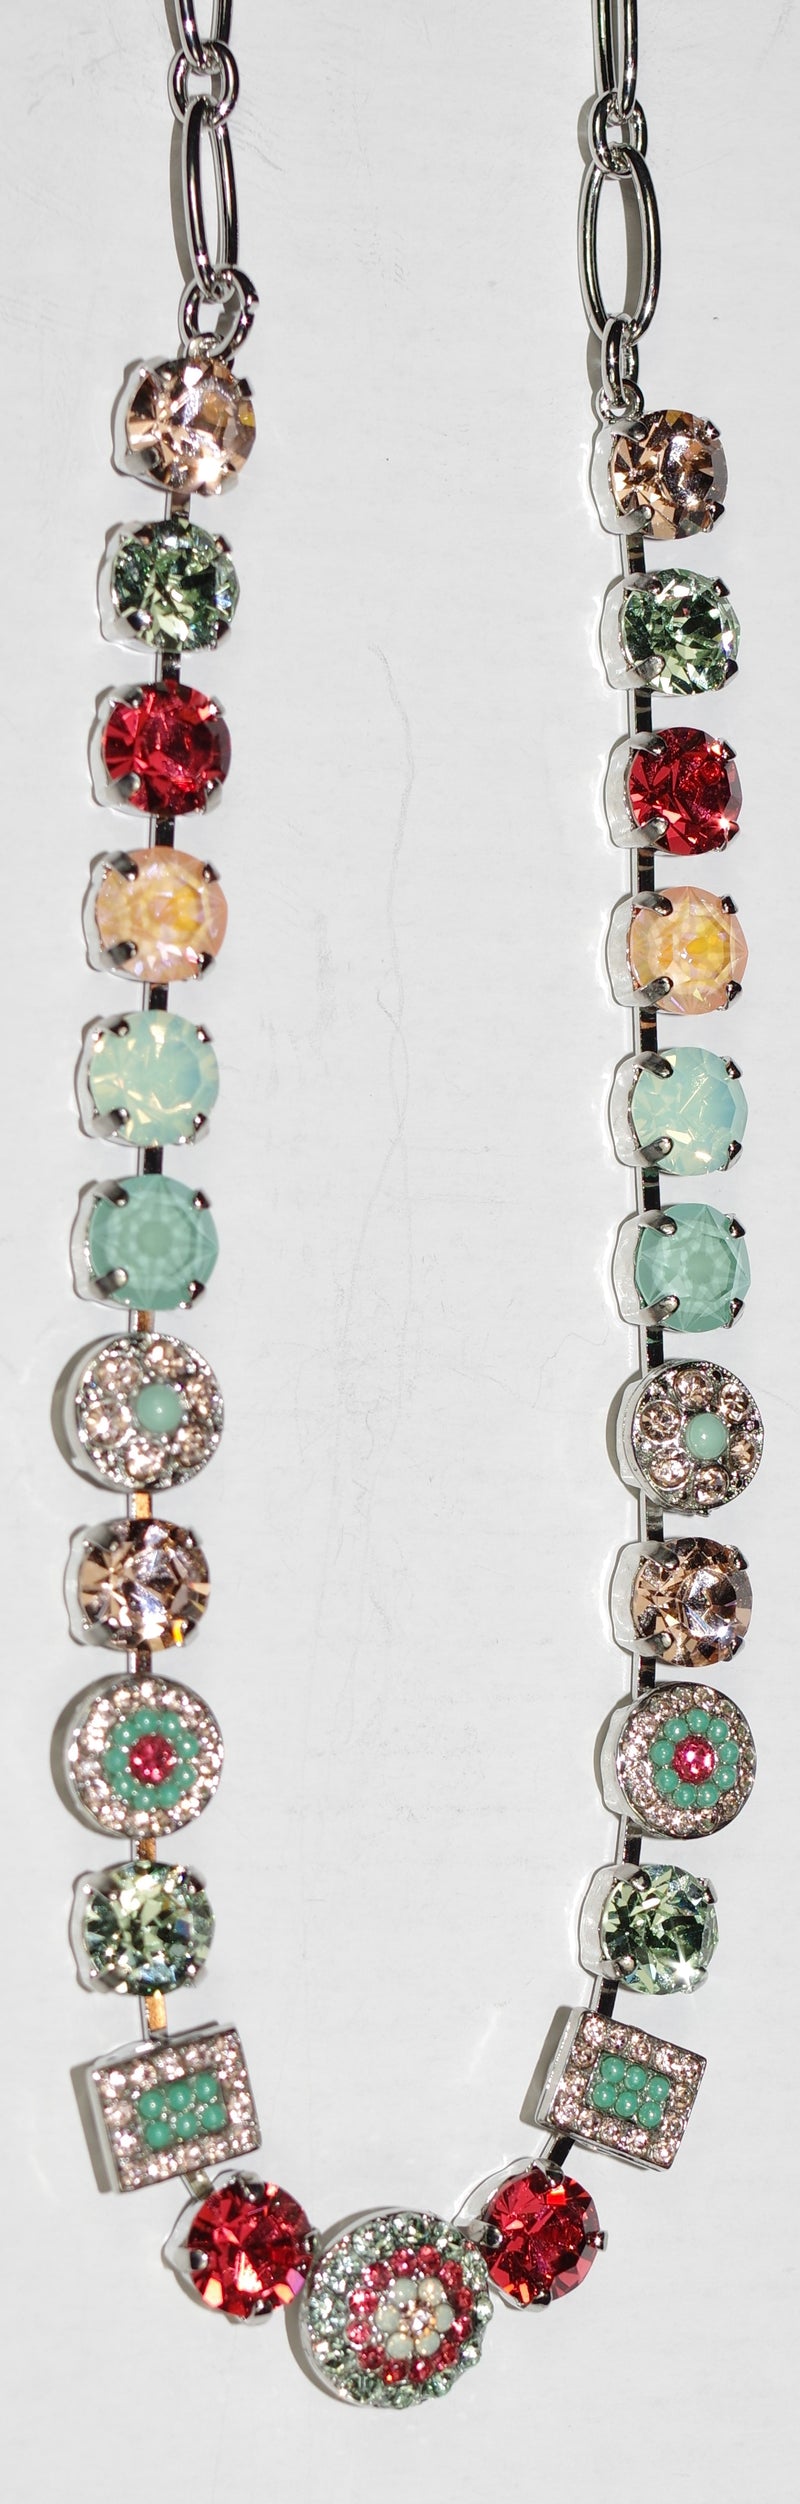 MARIANA NECKLACE MONARCH: orange, peach, green, pacific opal, amber 1/4" stones in rhodium setting, 18" adjustable chain